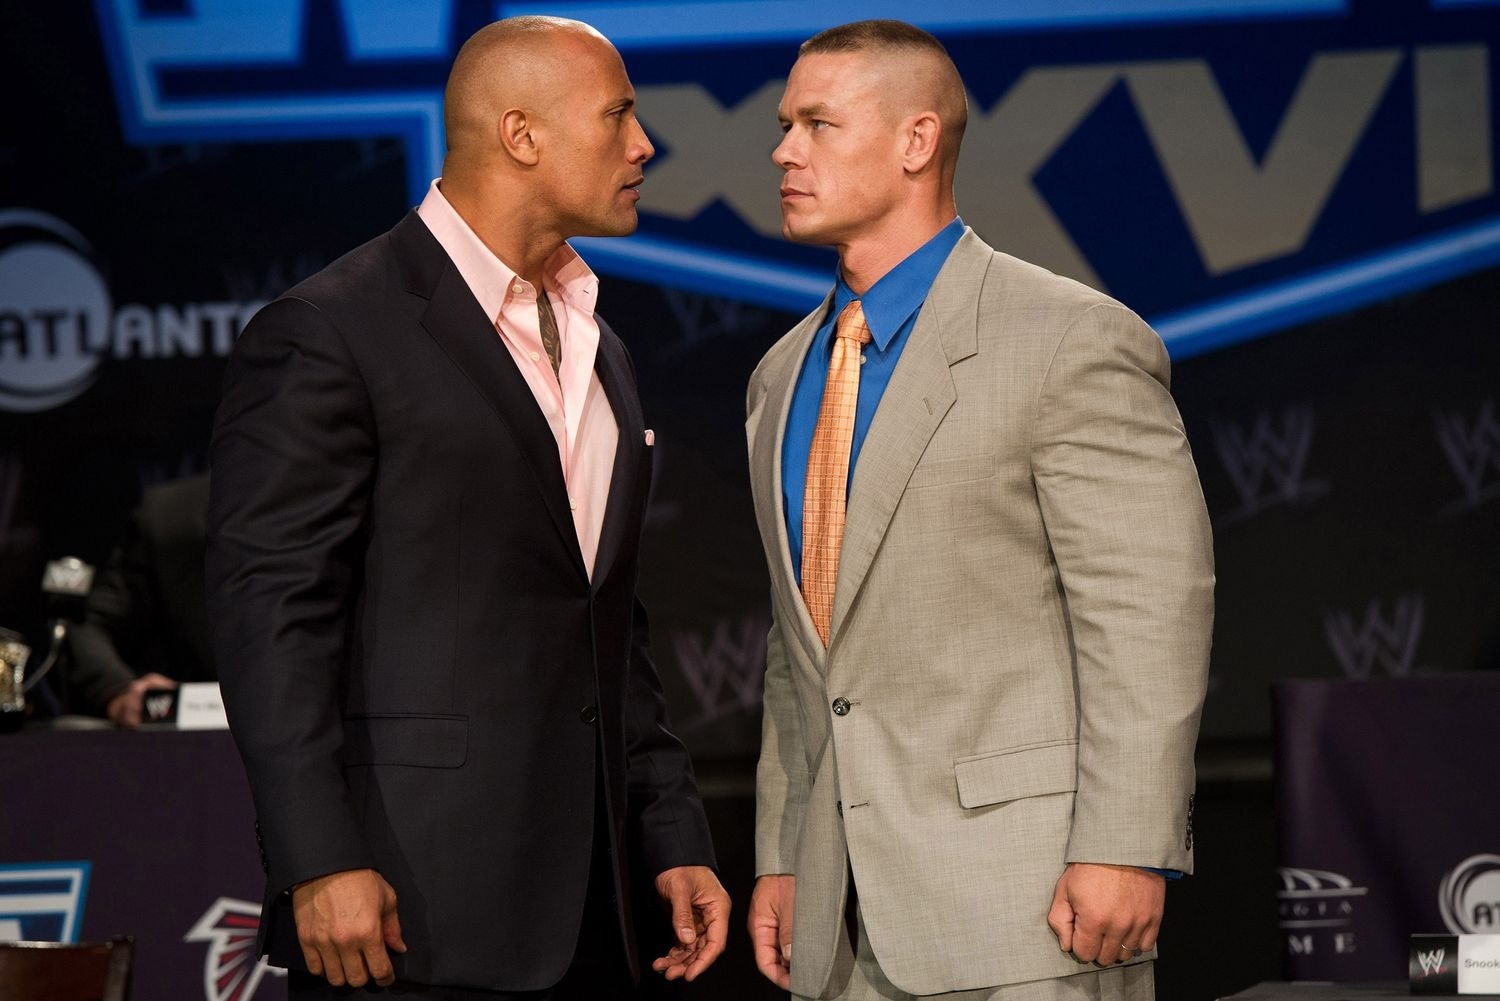 Ohn Cena, In A Recent Interview, Opened Up About His Feelings Of Remorse Regarding The Beginning Of His Feud With The Rock. – The Rock